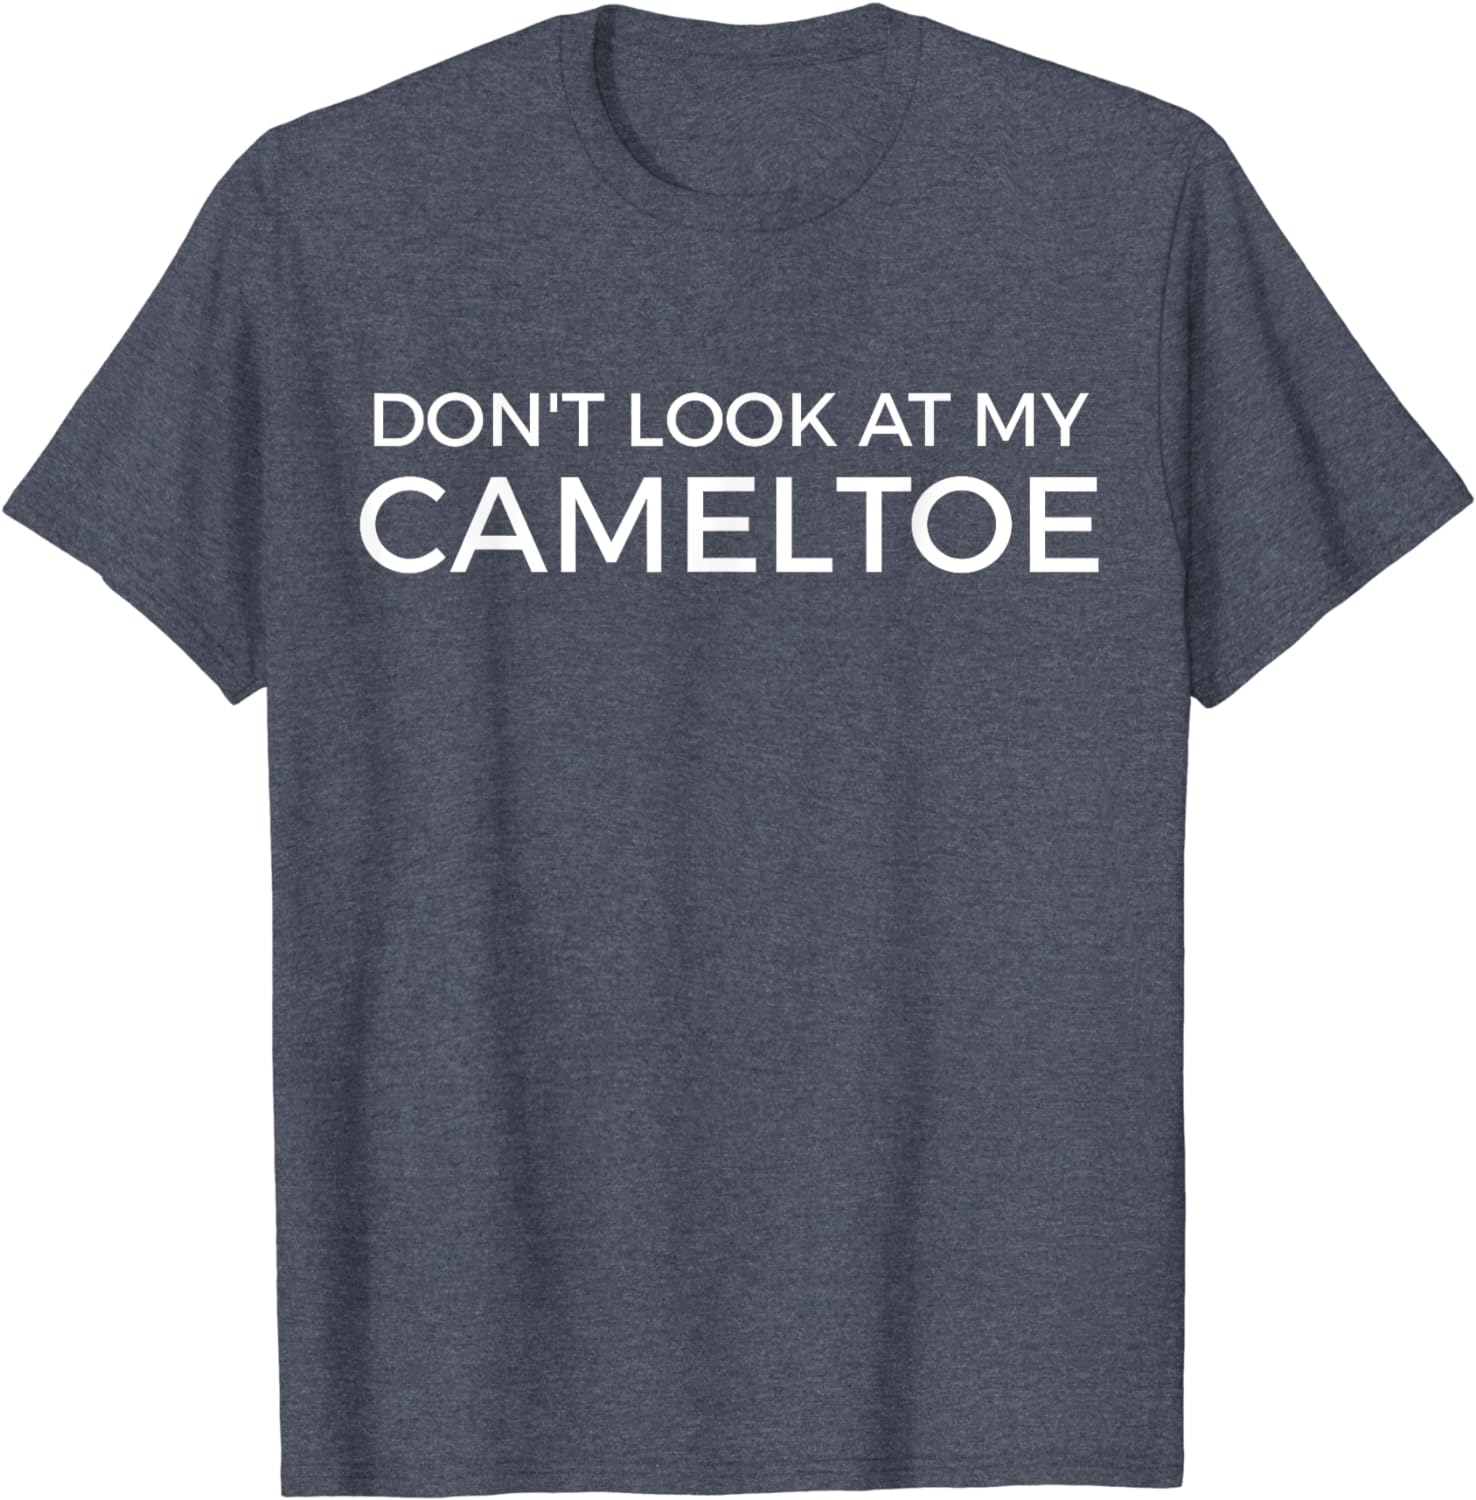 daniel sternshein recommends Look At My Cameltoe